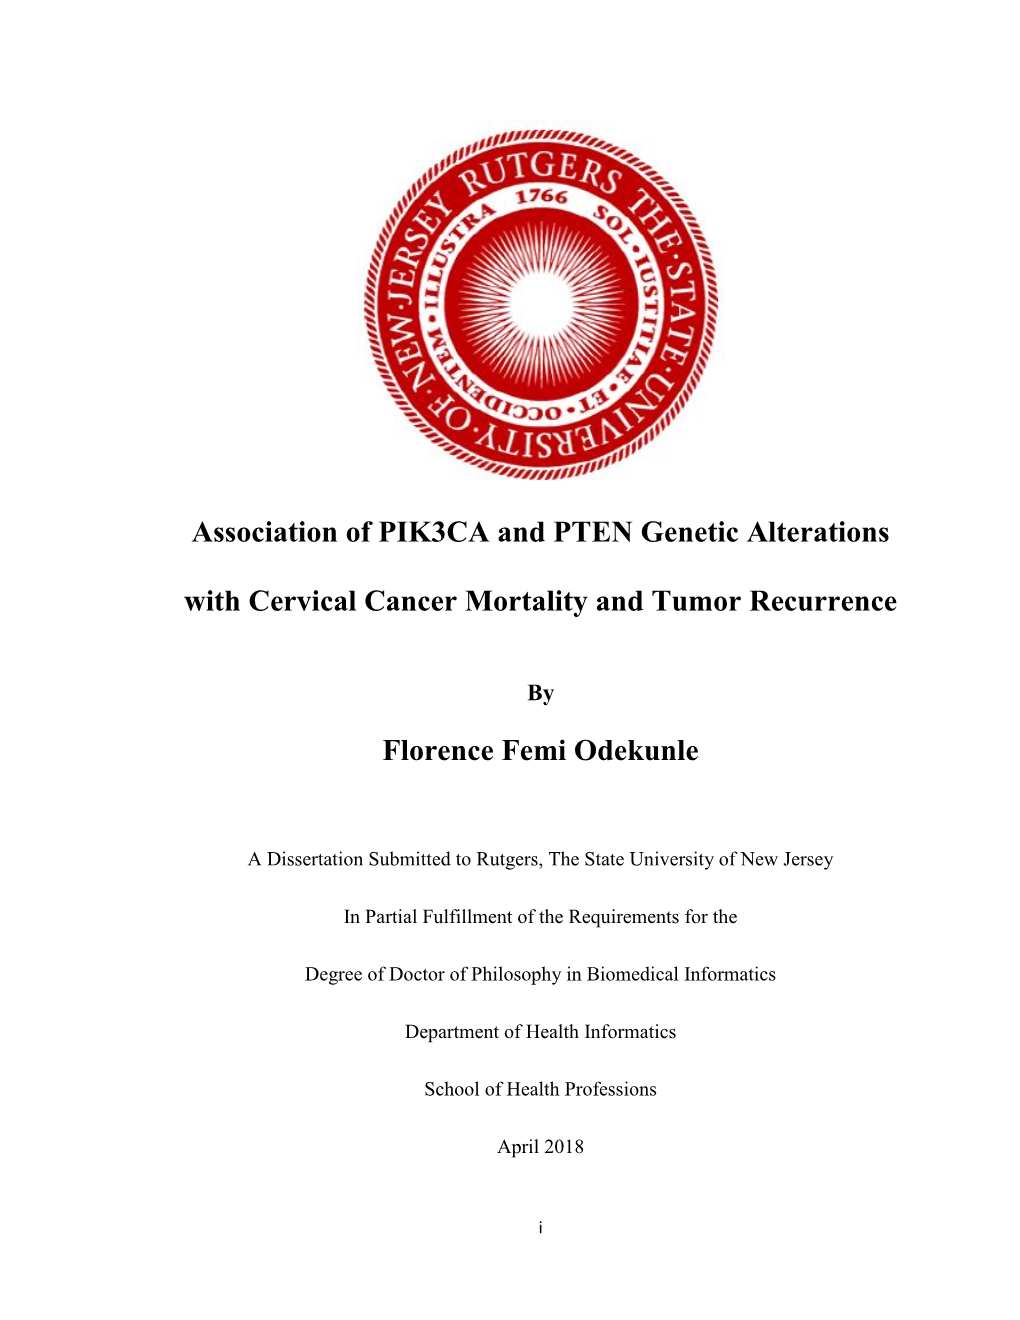 Association of PIK3CA and PTEN Genetic Alterations with Cervical Cancer Mortality and Tumor Recurrence